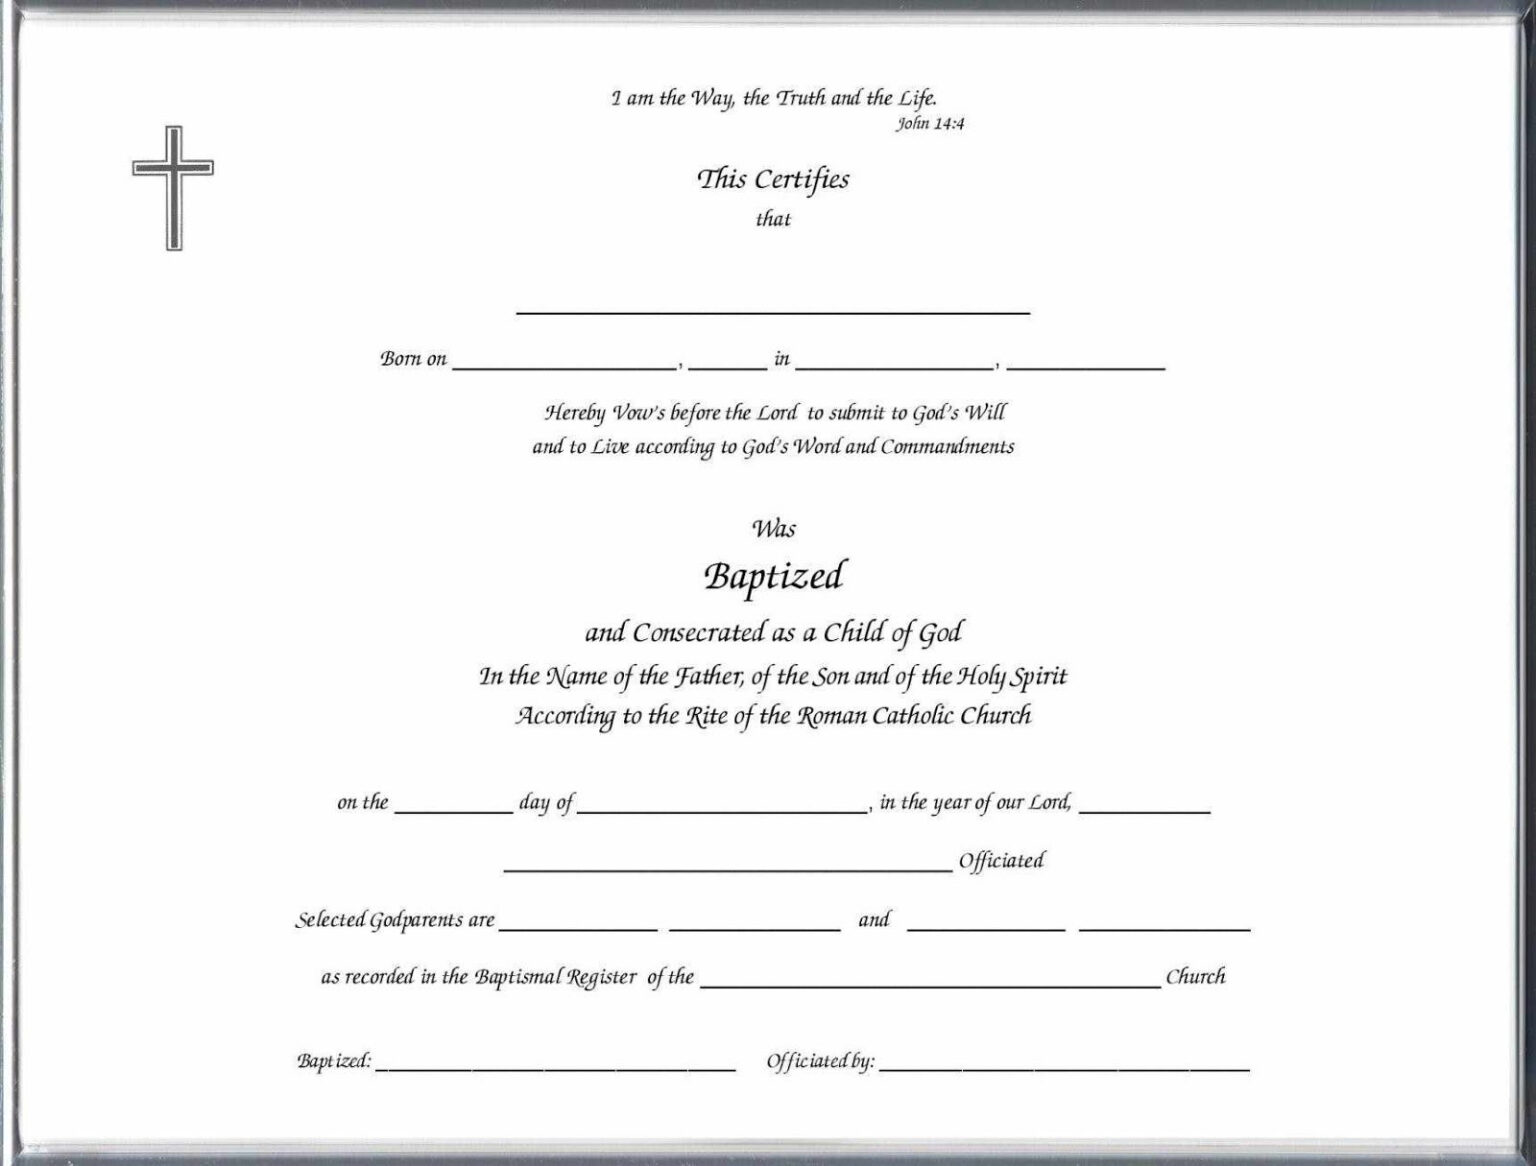 007-certificate-of-baptism-template-ideas-unique-broadman-throughout